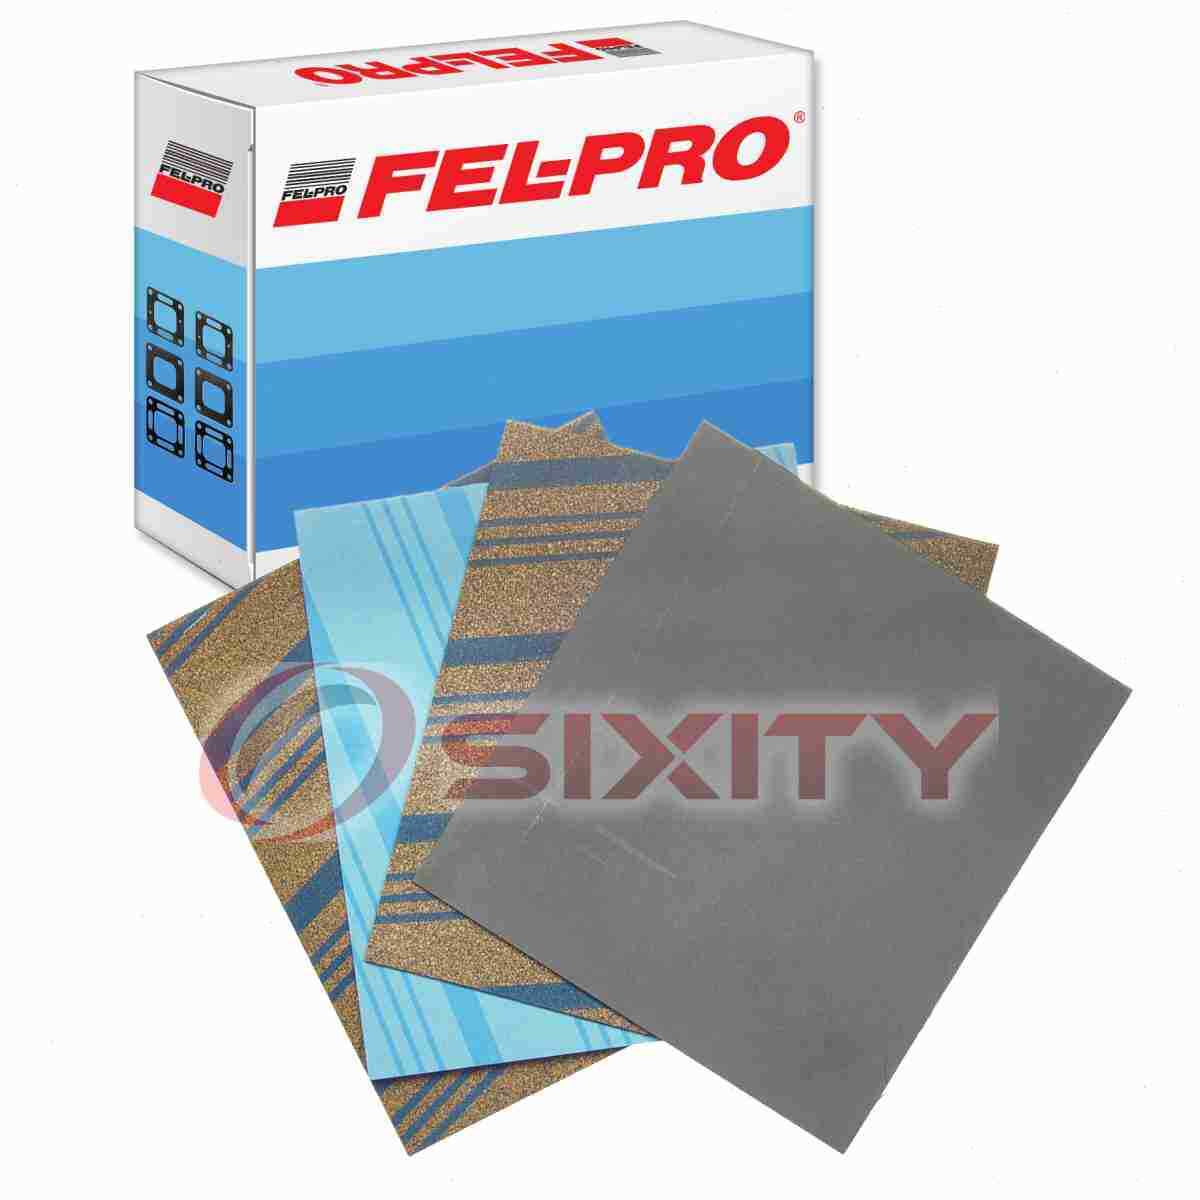 Fel-Pro 3060 Gasket Making Material for MA90A JV1 57157 Hardware Service xa